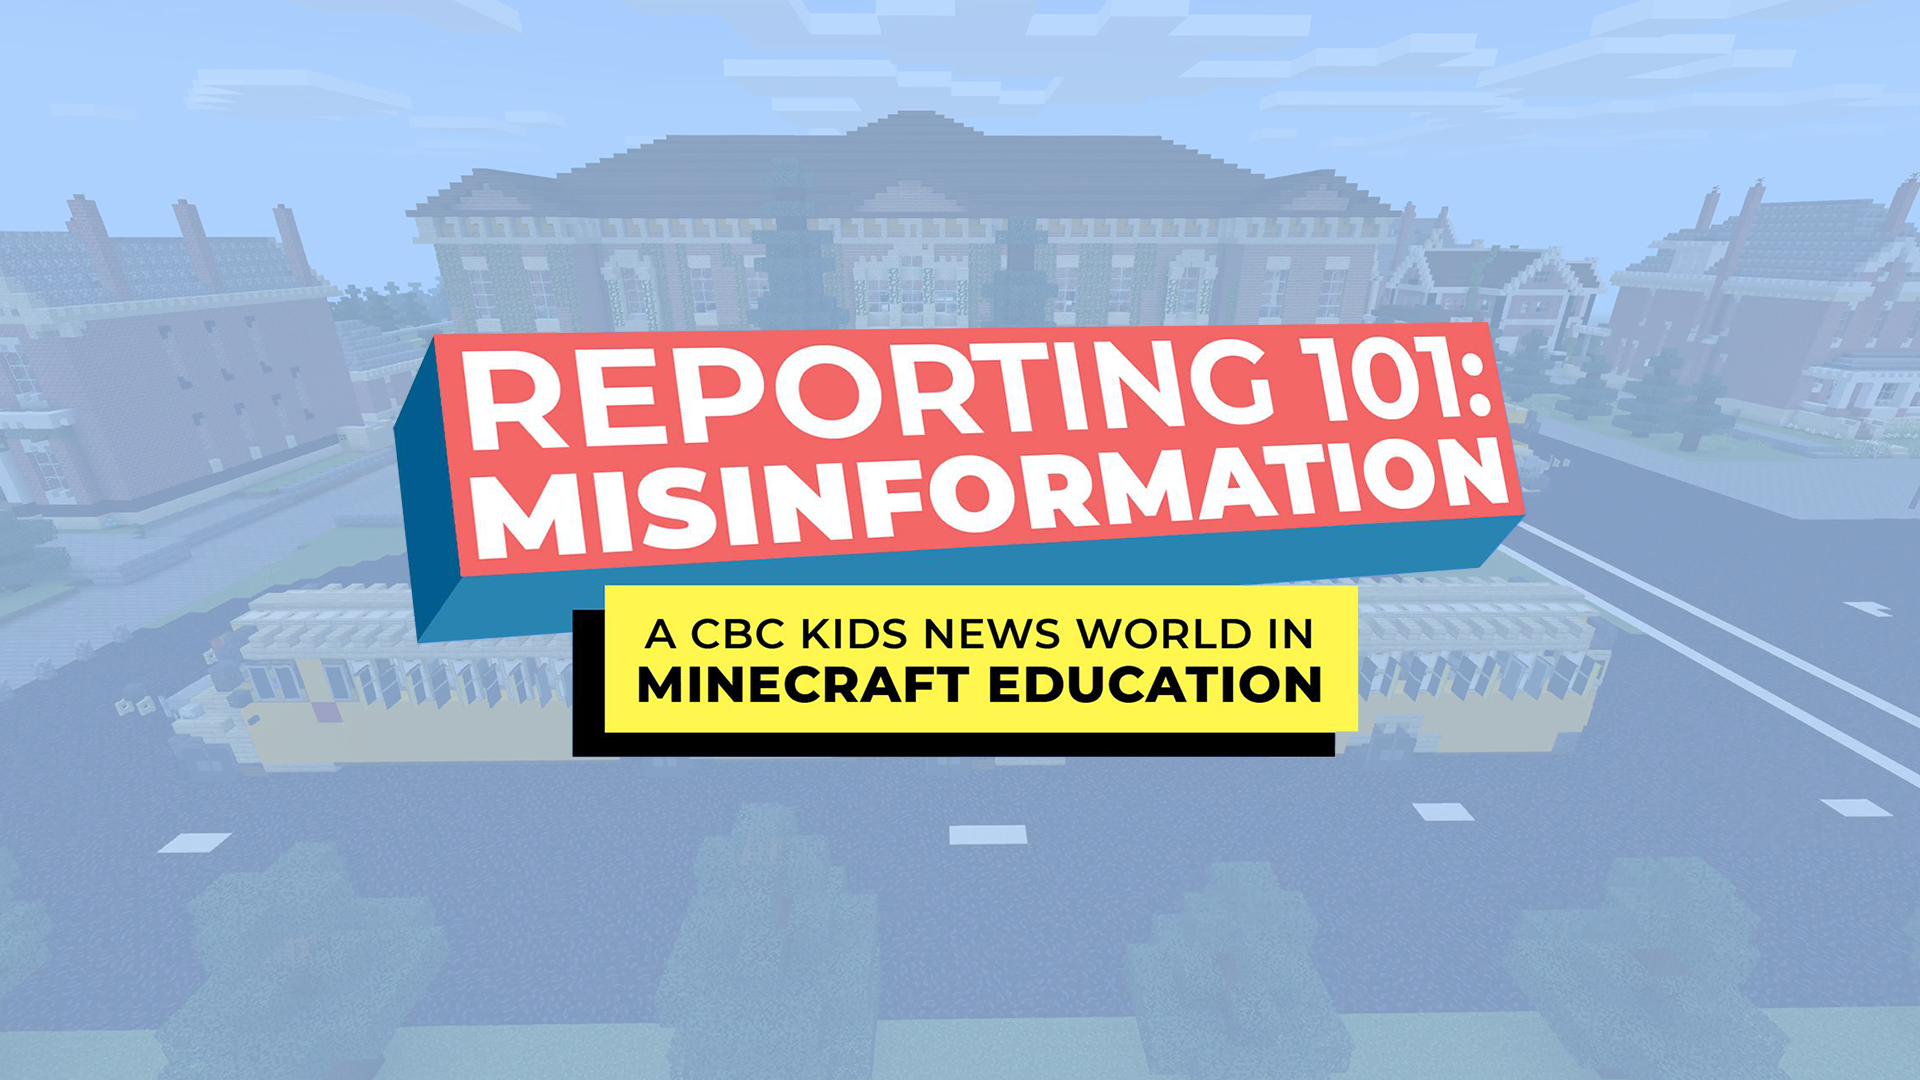 Minecraft homescreen with a school bus with title Reporting 101: Misinformation